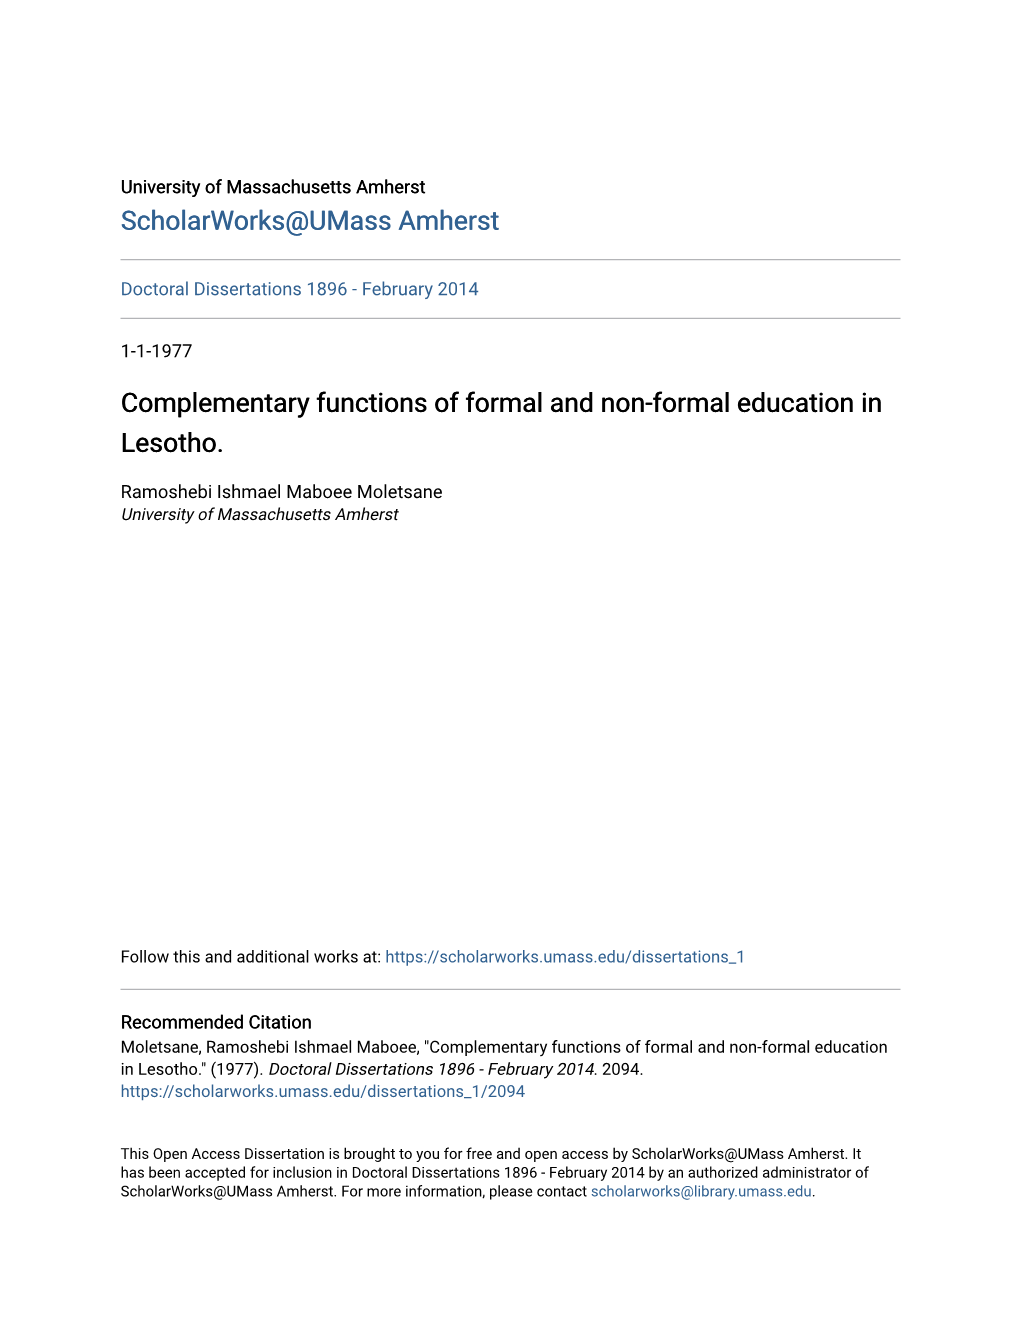 Complementary Functions of Formal and Non-Formal Education in Lesotho